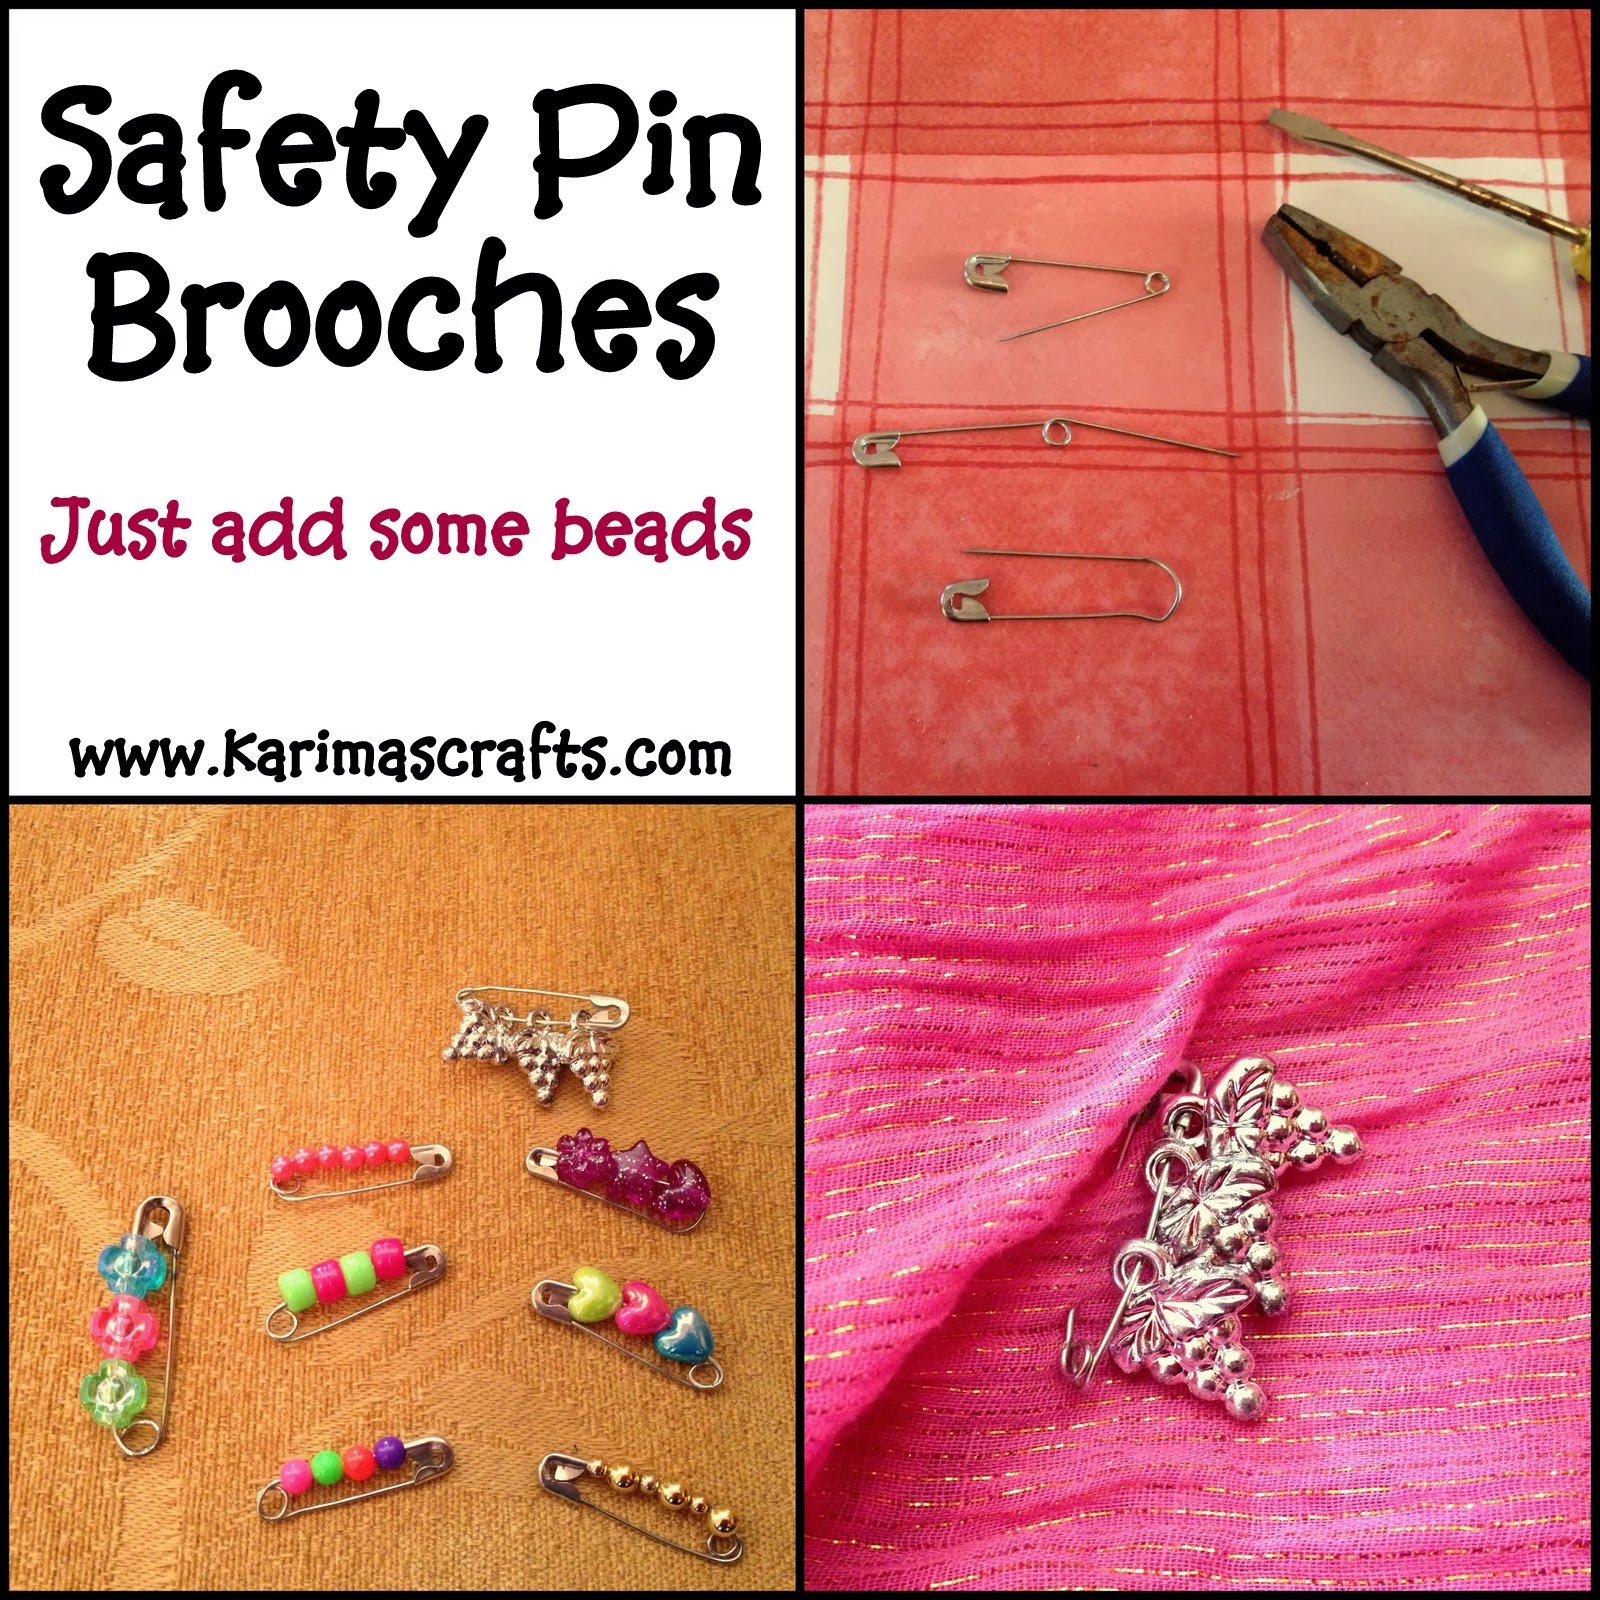 Karima's Crafts: Safety Pin Brooches Tutorial